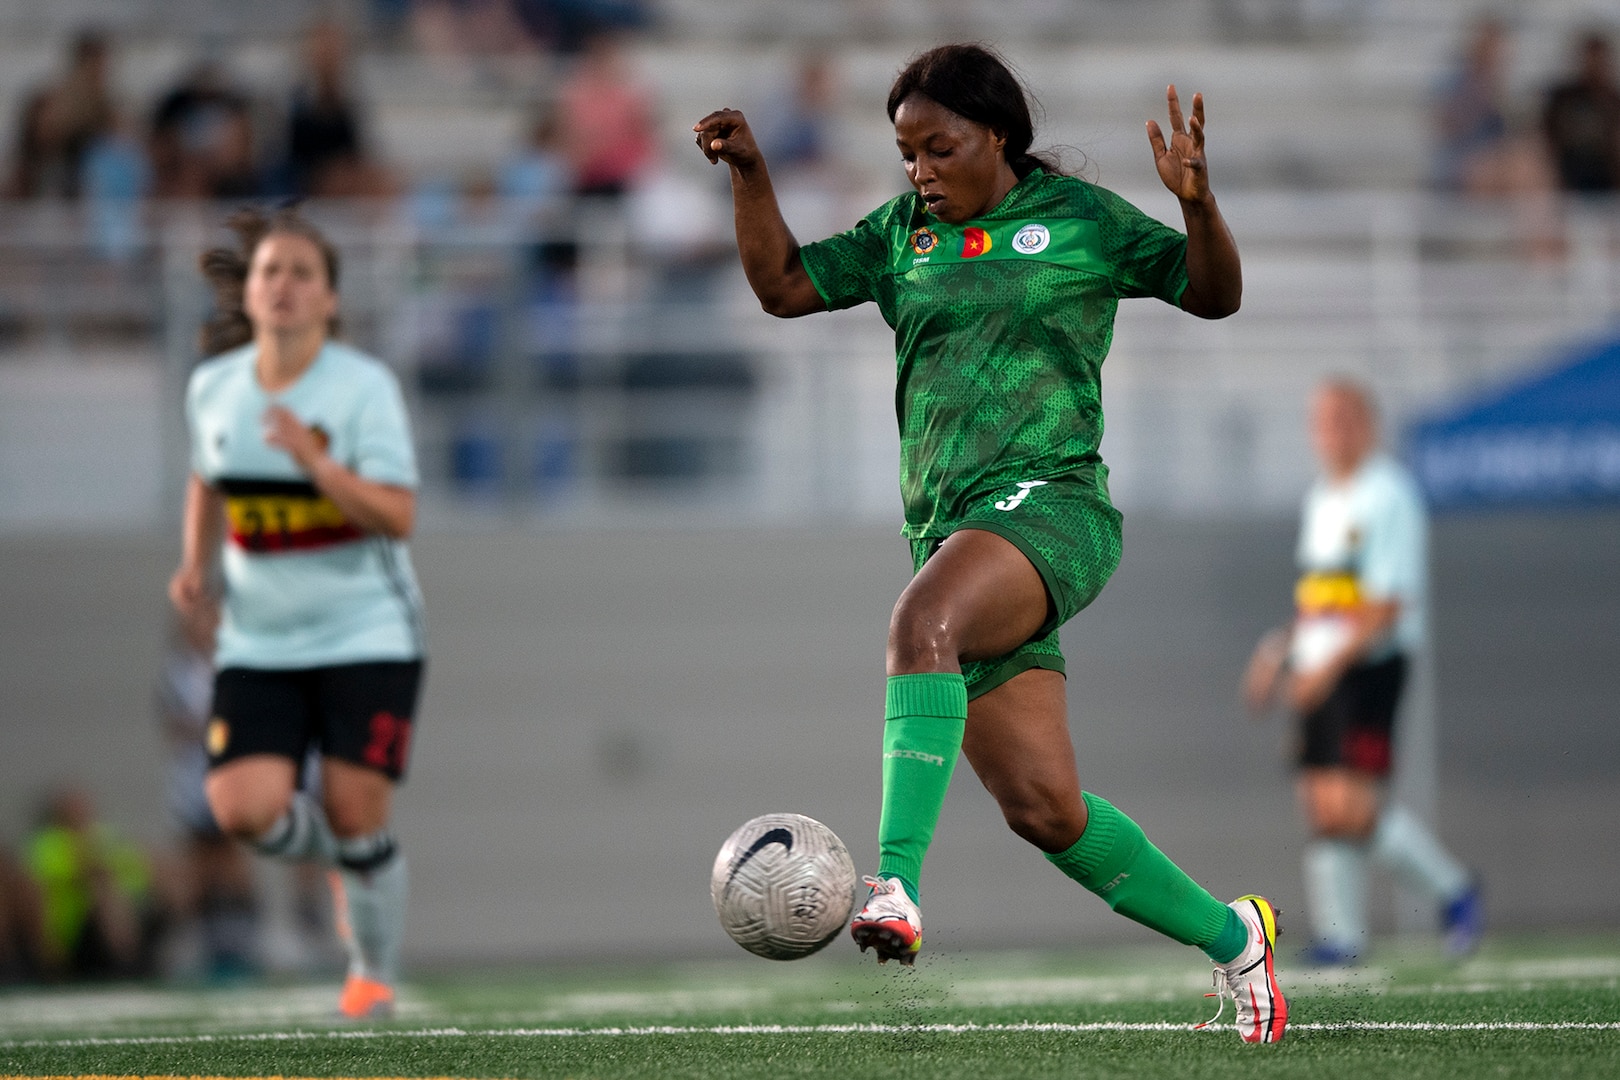 Cameroon’s Guylaine Weladji Tchadeu scores a goal against Belgium during the 13th CISM (International Military Sports Council) World Military Women’s Football Championship in Meade, Washington July 19, 2022. (DoD photo by EJ Hersom)